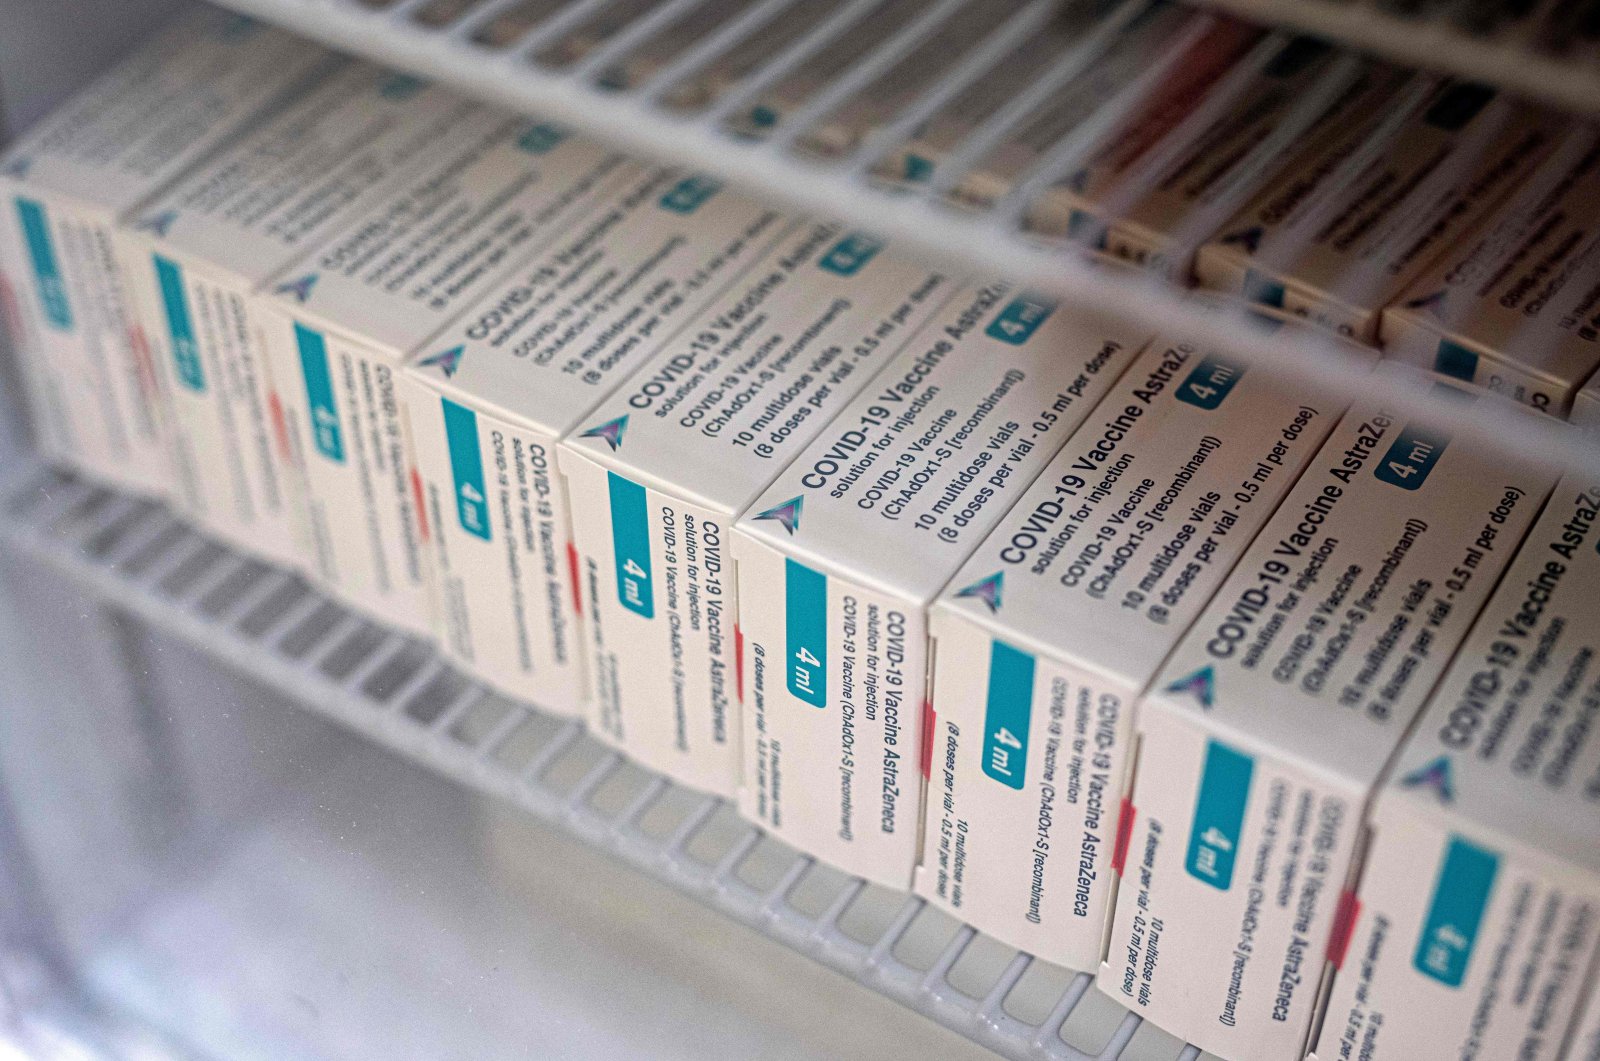 Packets of the AstraZeneca/Oxford Covid-19 vaccine, destined for housebound patients, are pictured in the fridge at Stubley Medical Centre near Chesterfield, central England, on April 14, 2021. (AFP Photo)